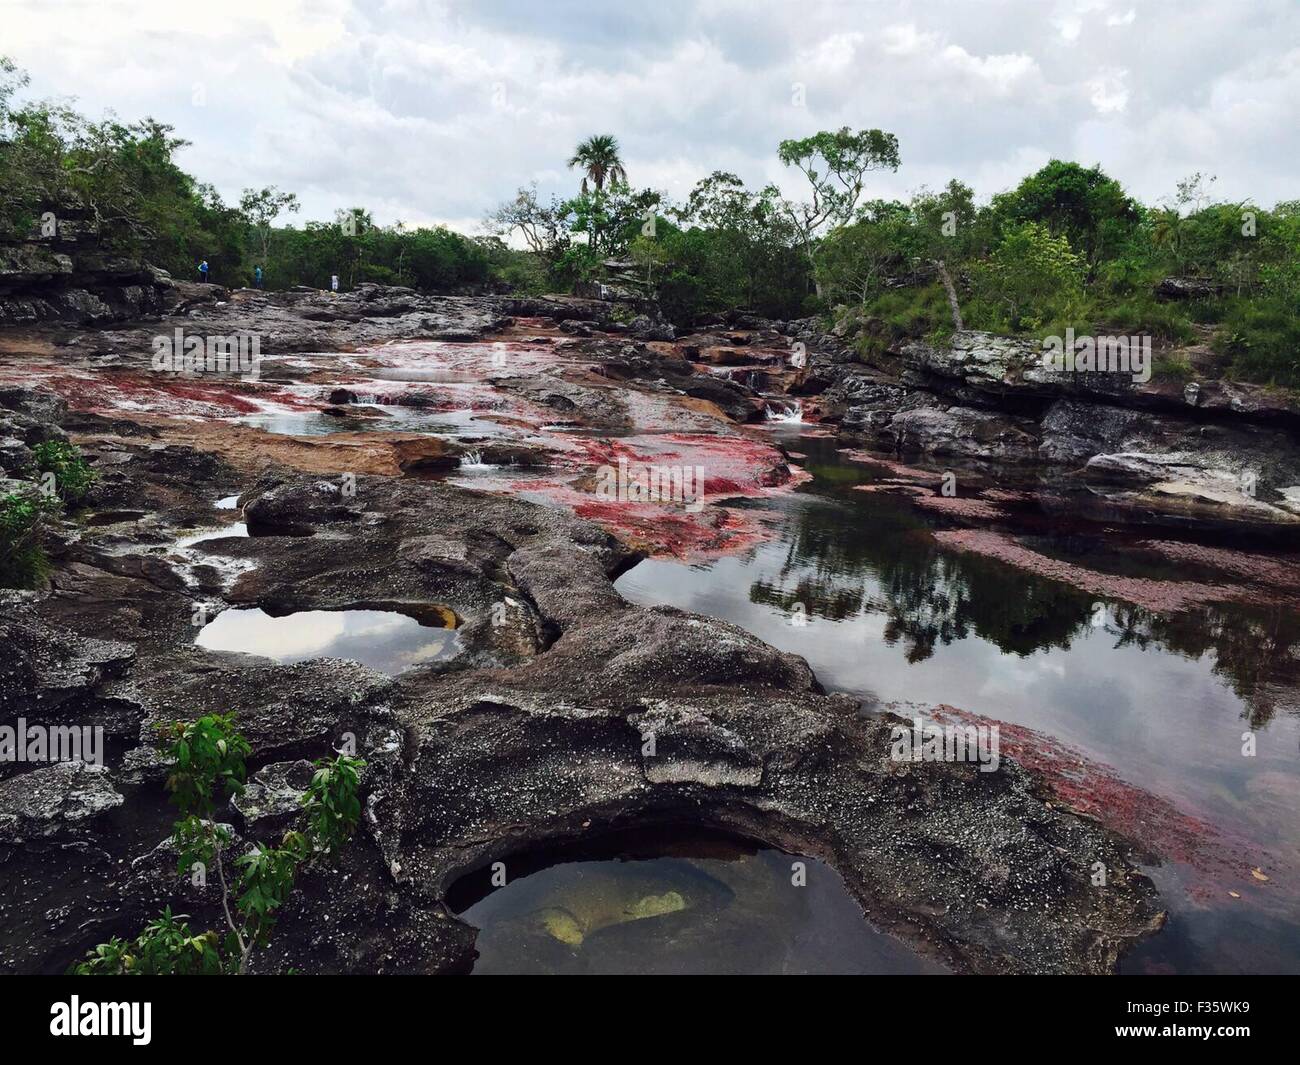 Meta. 29th Sep, 2015. Photo taken on Sept. 29, 2015 shows the Cano Cristales river in La Macarena, Meta, Colombia. According to local press, the access to Cano Cristales will be prohibited from next Oct. 1 because the flow is at the minimum of 30 percent due to 'El nino' phenomenon. Credit:  COLPRENSA/Xinhua/Alamy Live News Stock Photo